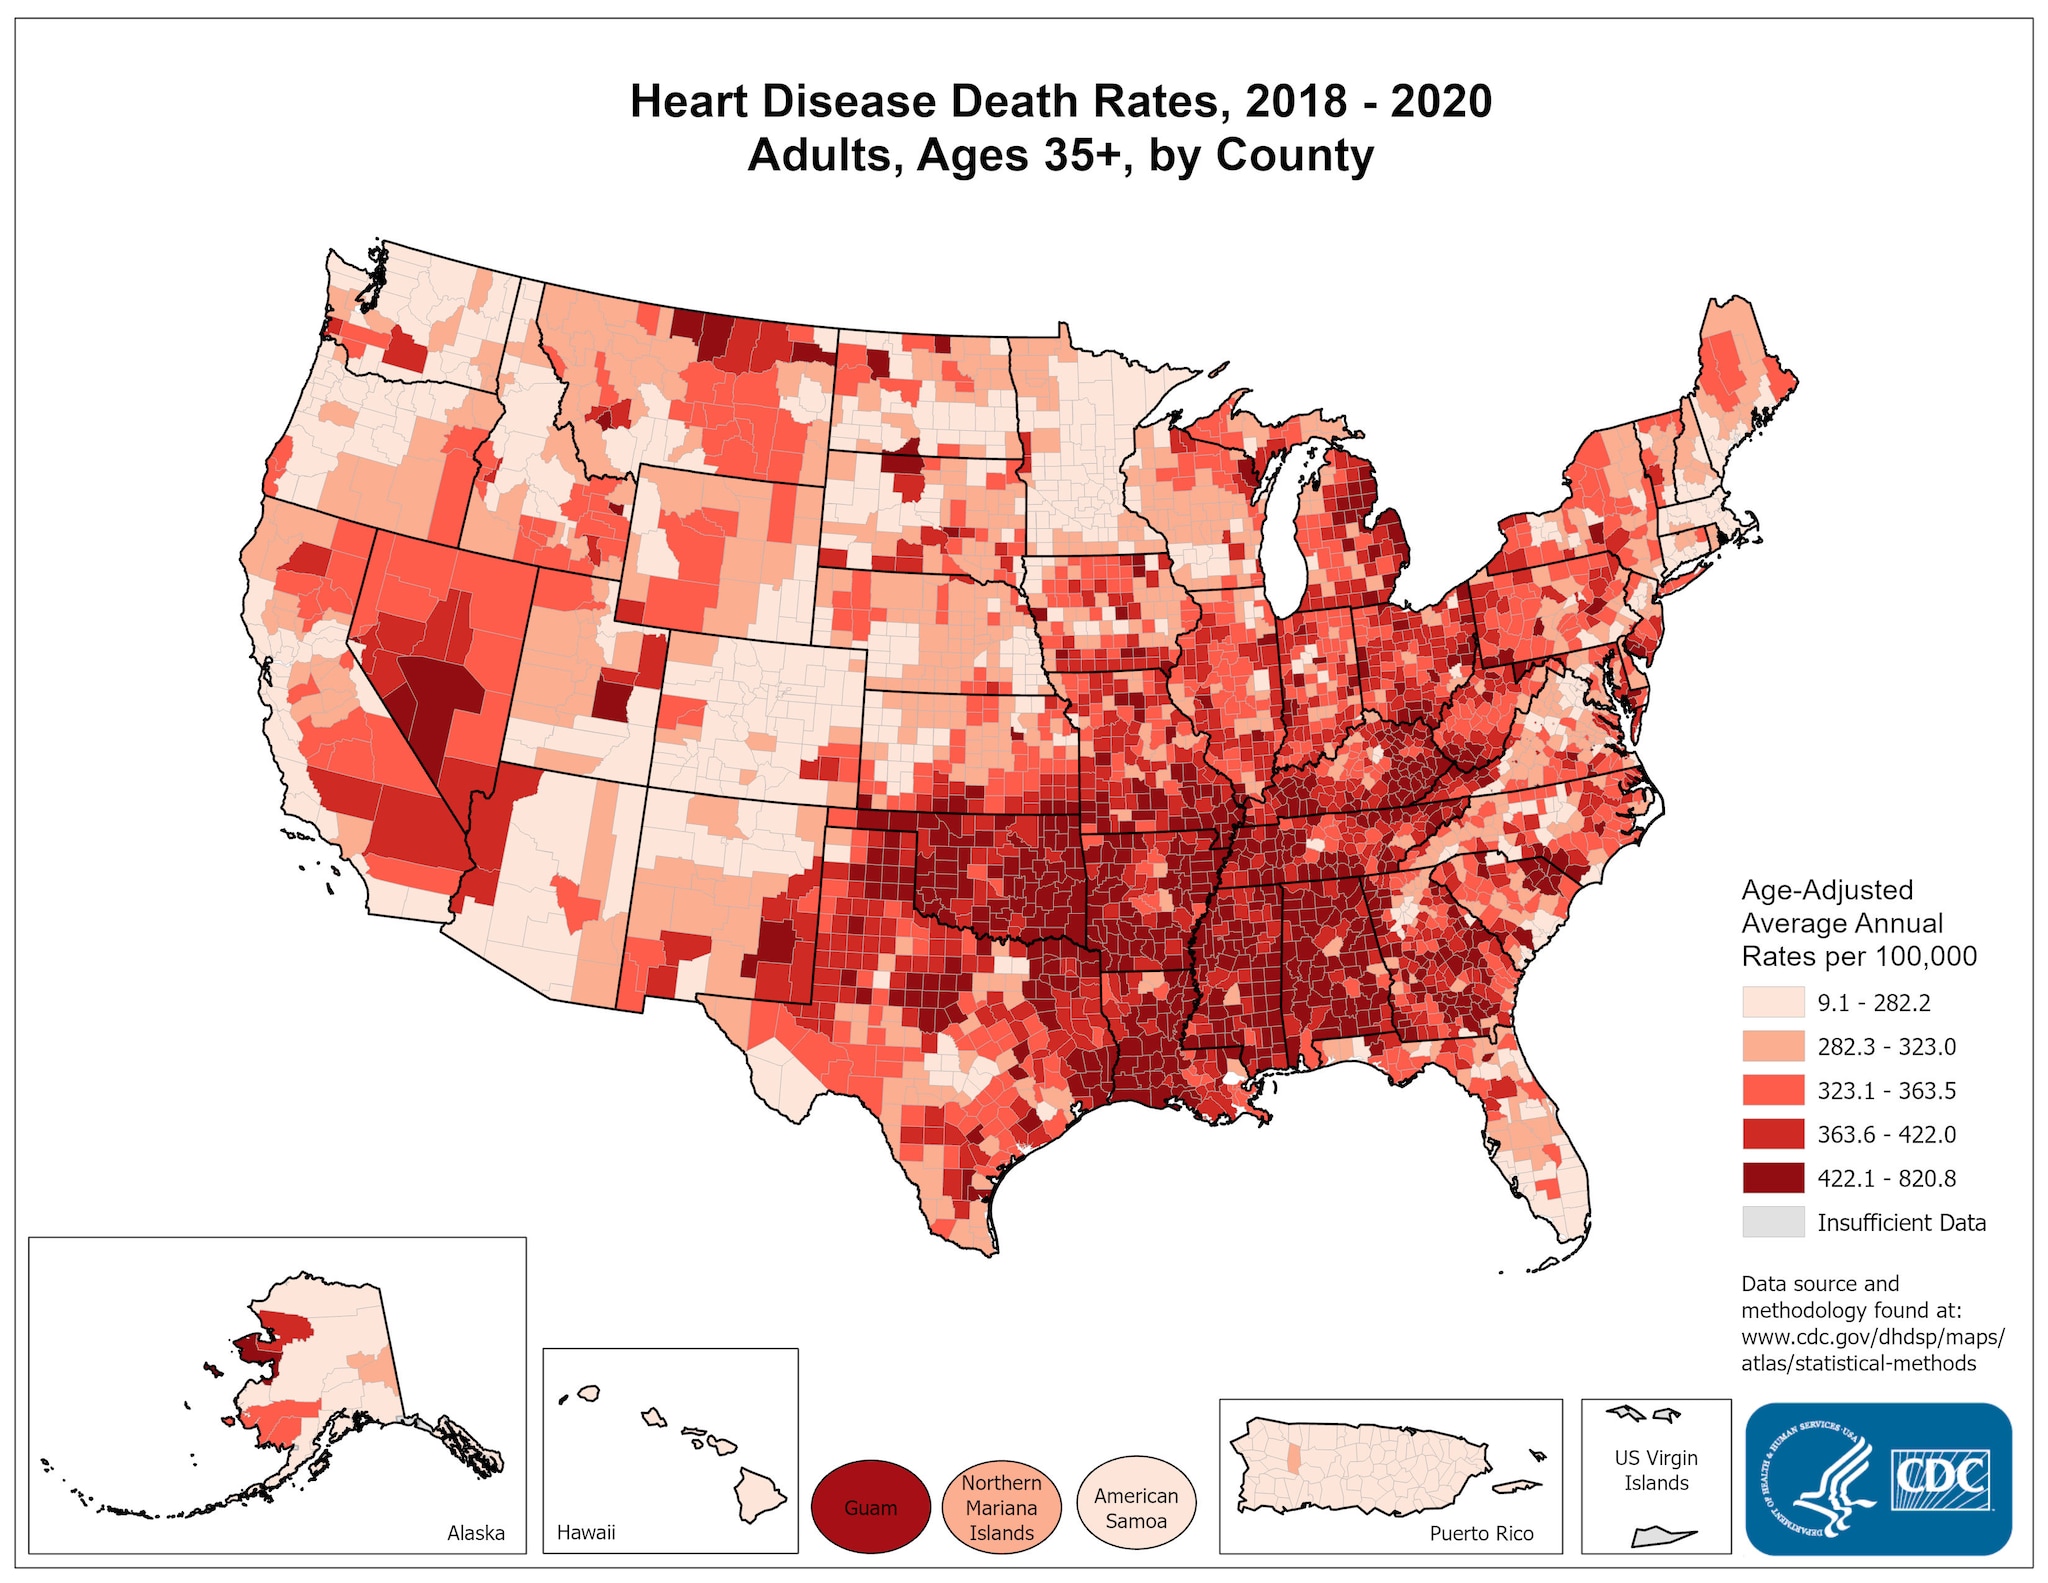 Heart Disease Death Rates for 2011 through 2013 for Adults Aged 35 Years and Older by County. The map shows that concentrations of counties with the highest heart disease death rates - meaning the top quintile - are located primarily in Mississippi, Oklahoma, Louisiana, Arkansas, and Alabama.  Pockets of high-rate counties also were found in Georgia, Kentucky, Tennessee, Missouri, and Nevada.